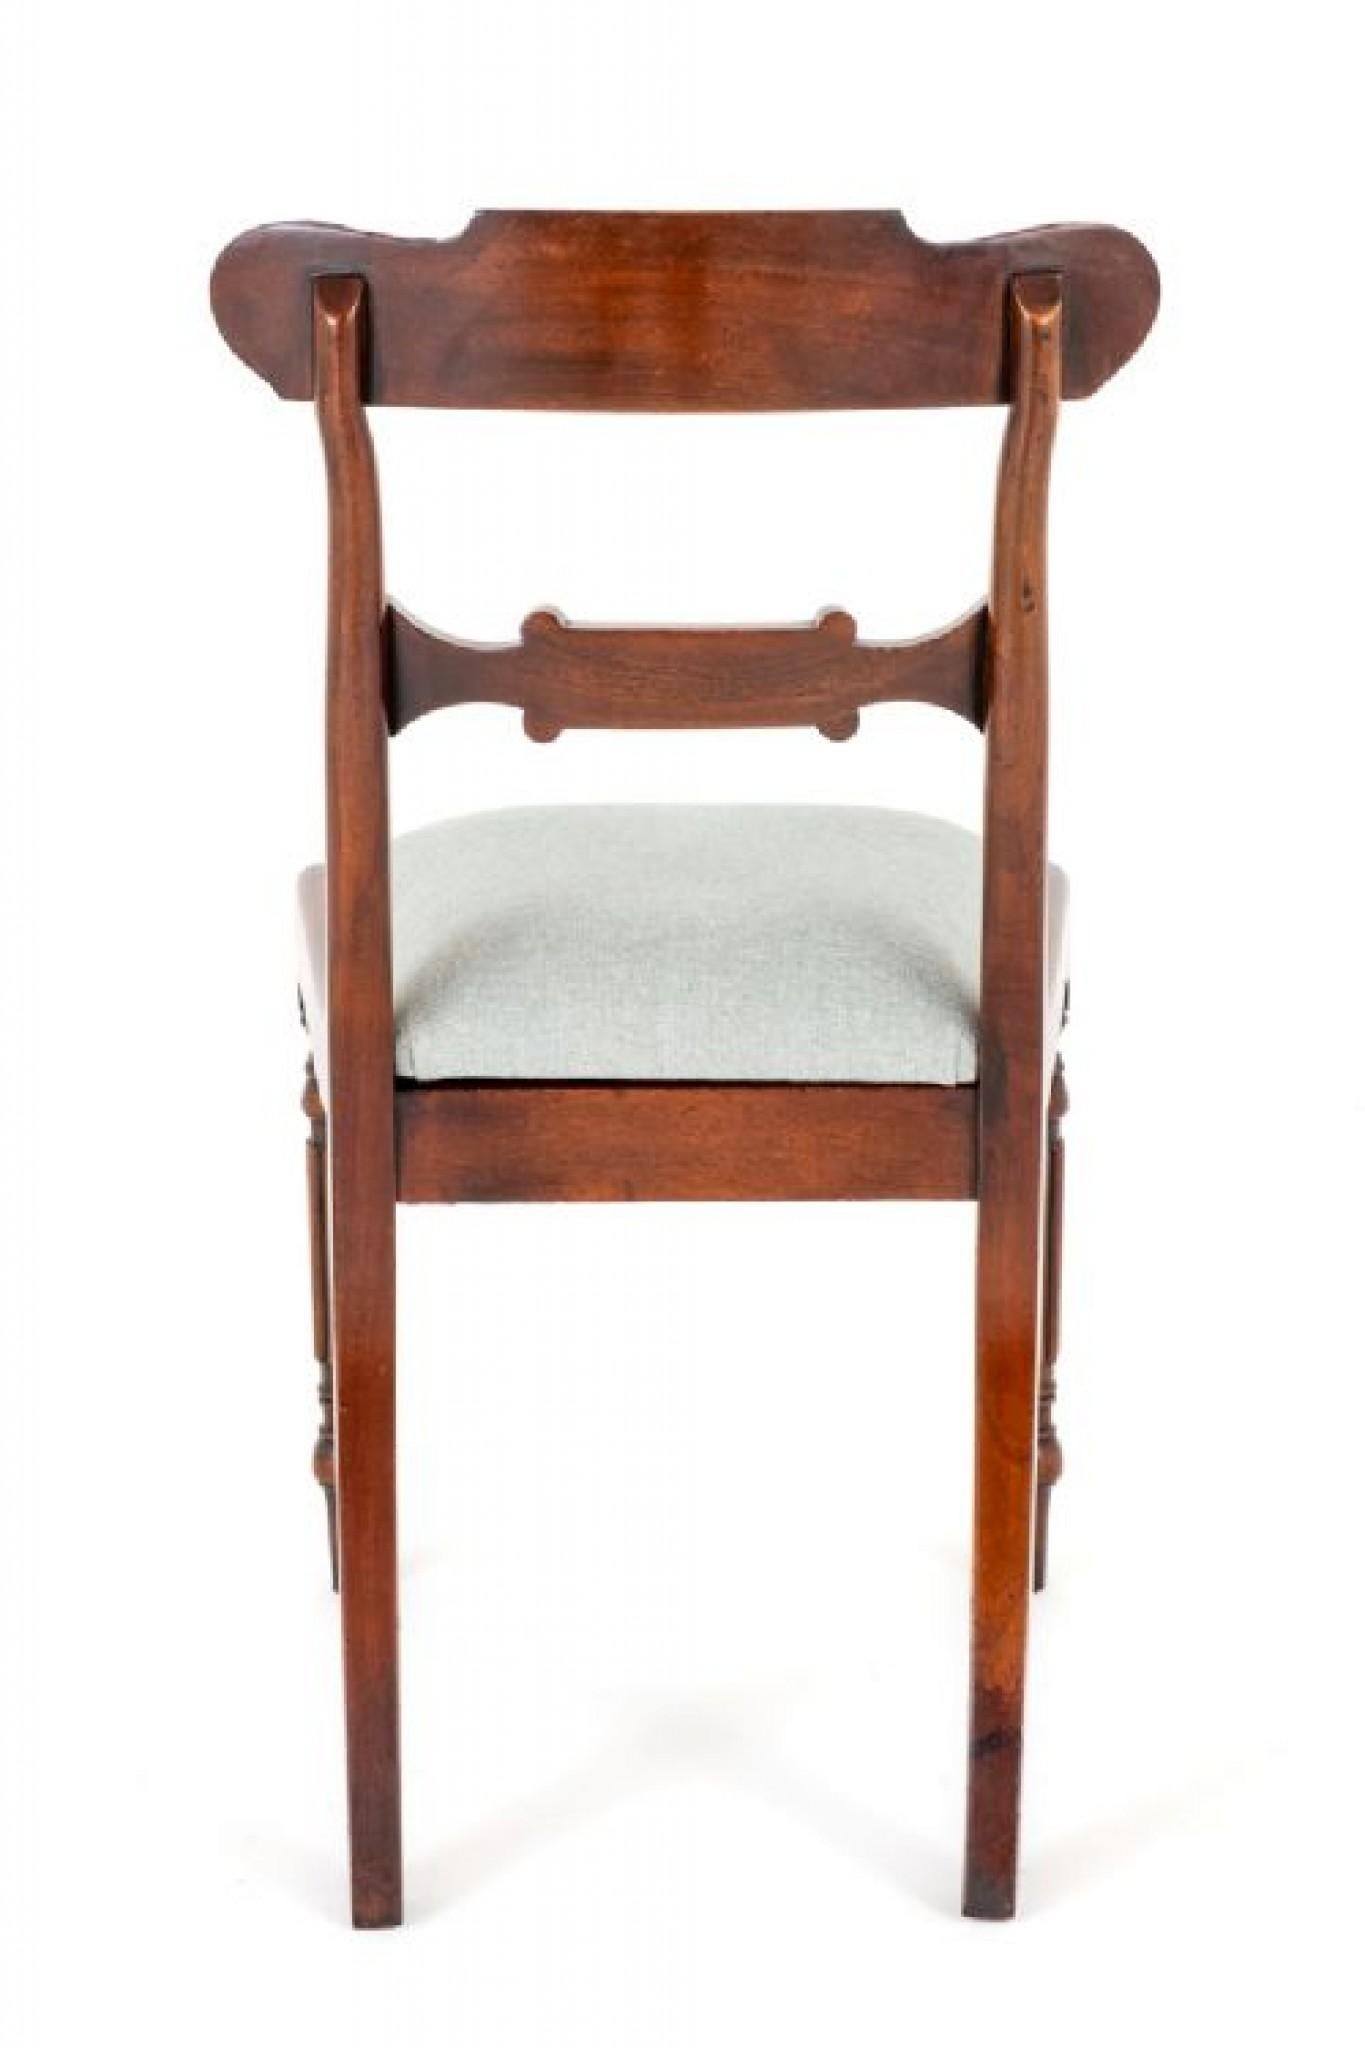 Set of 10 William IV Style mahogany dining chairs.
circa 1900
The chairs stand upon ring turned and fluted front legs with swept back legs.
The front seat rail featuring typical William IV carved tulips.
The lift out seats having recently been